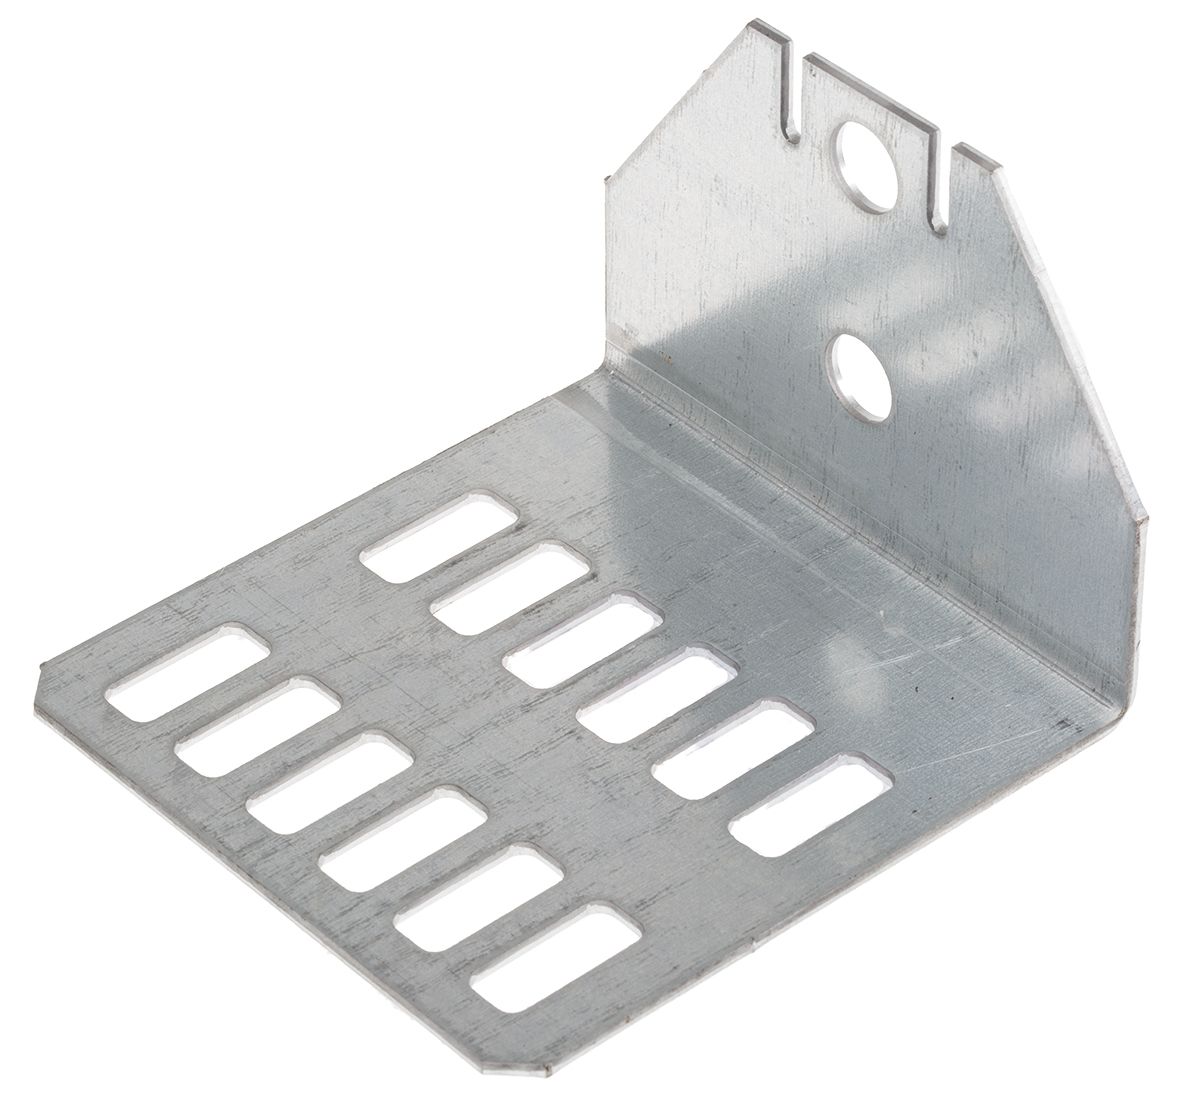 Legrand Cantilever Arm Bracket Pre-Galvanised Steel Cable Tray Accessory, 75 mm Width, 65mm Depth